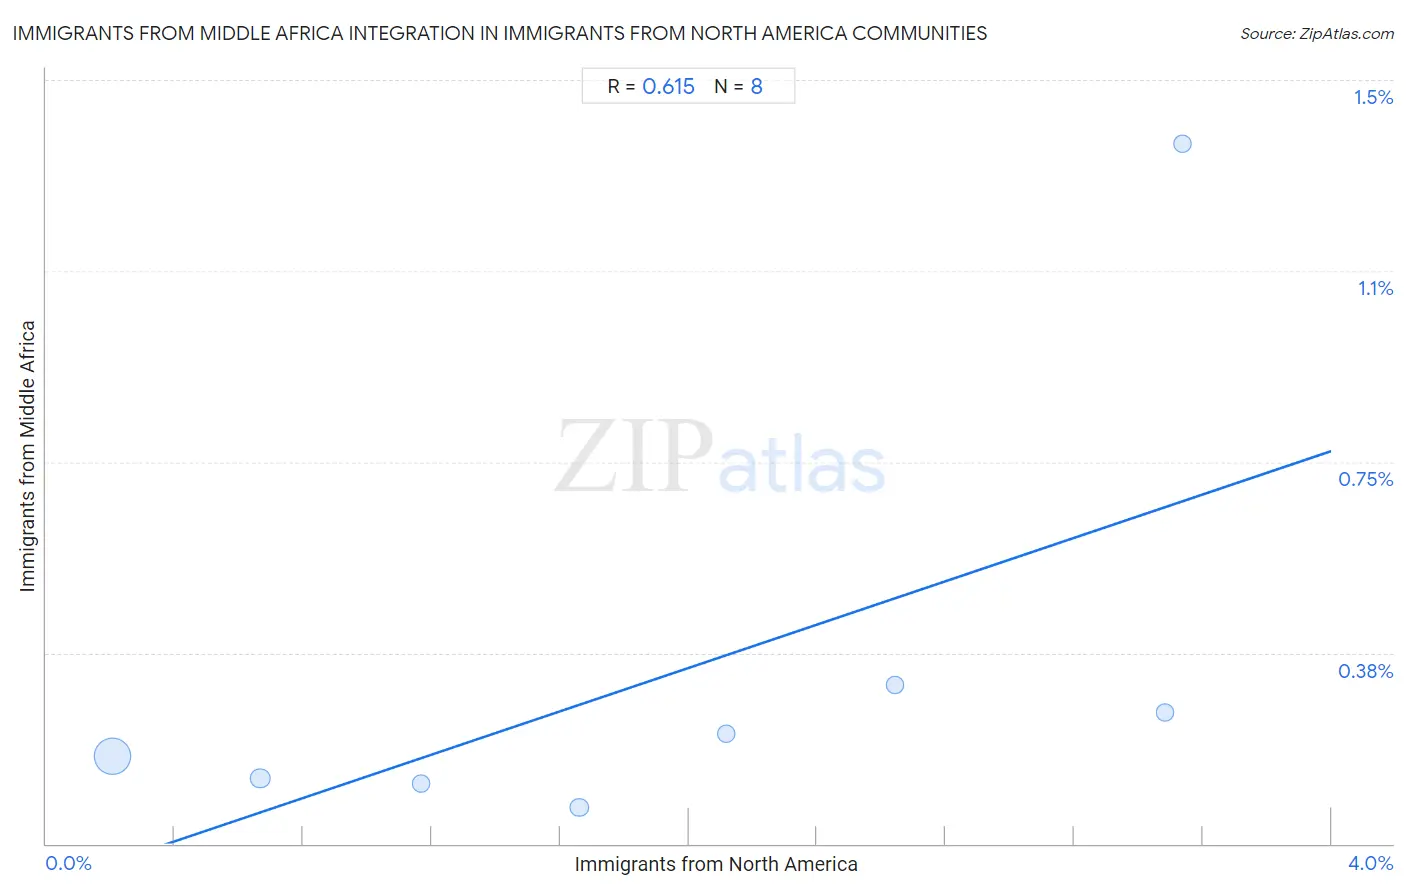 Immigrants from North America Integration in Immigrants from Middle Africa Communities